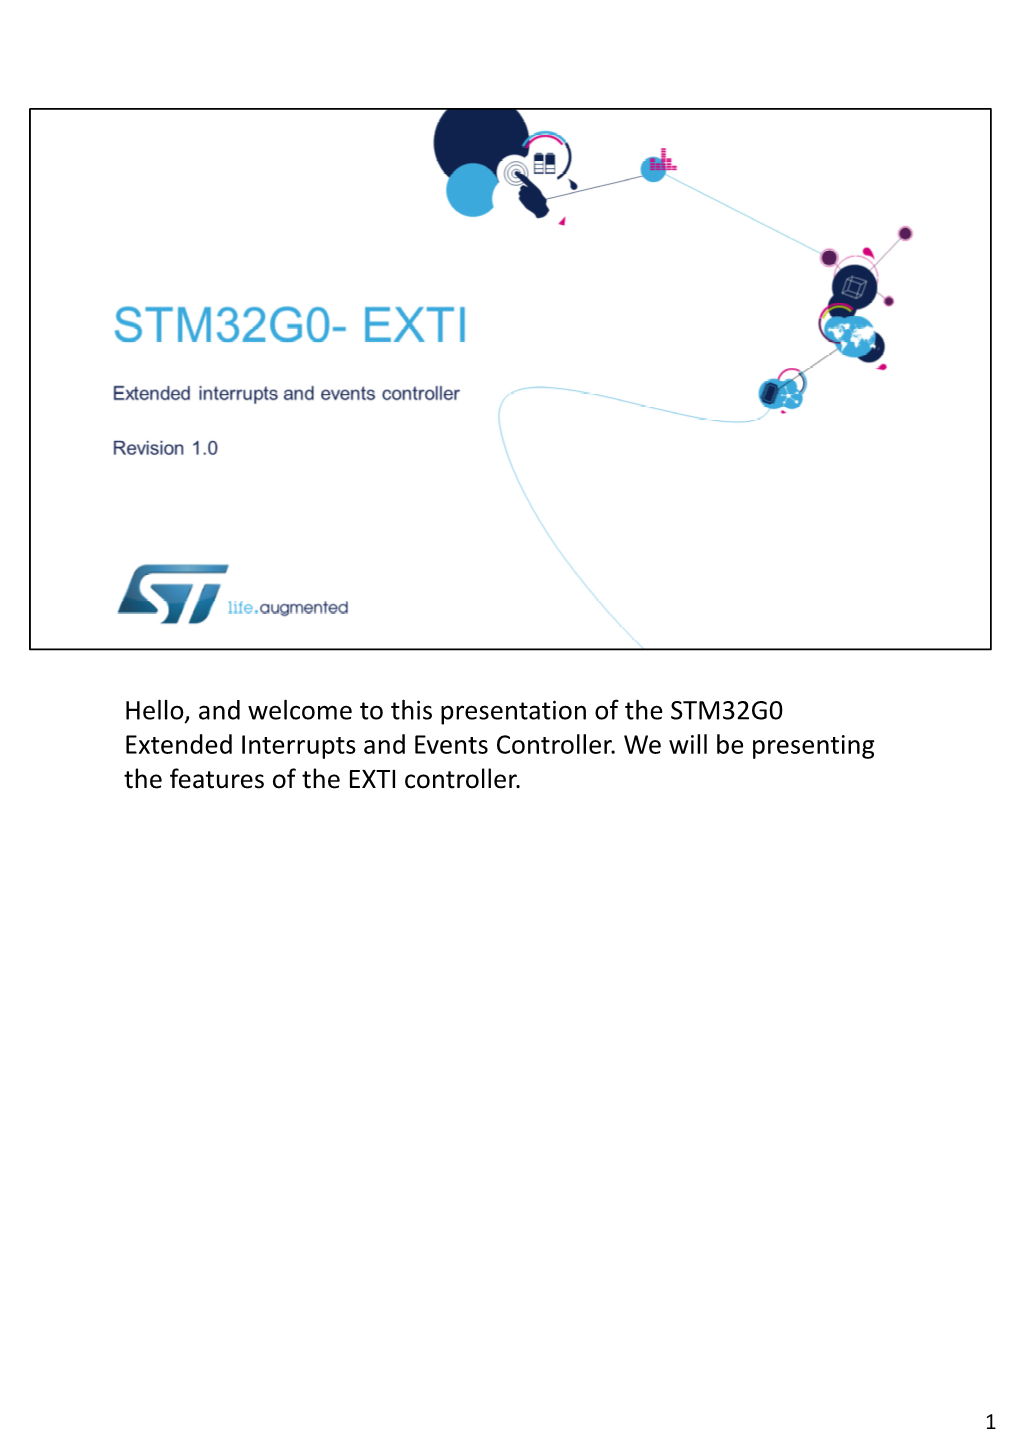 Hello, and Welcome to This Presentation of the STM32G0 Extended Interrupts and Events Controller